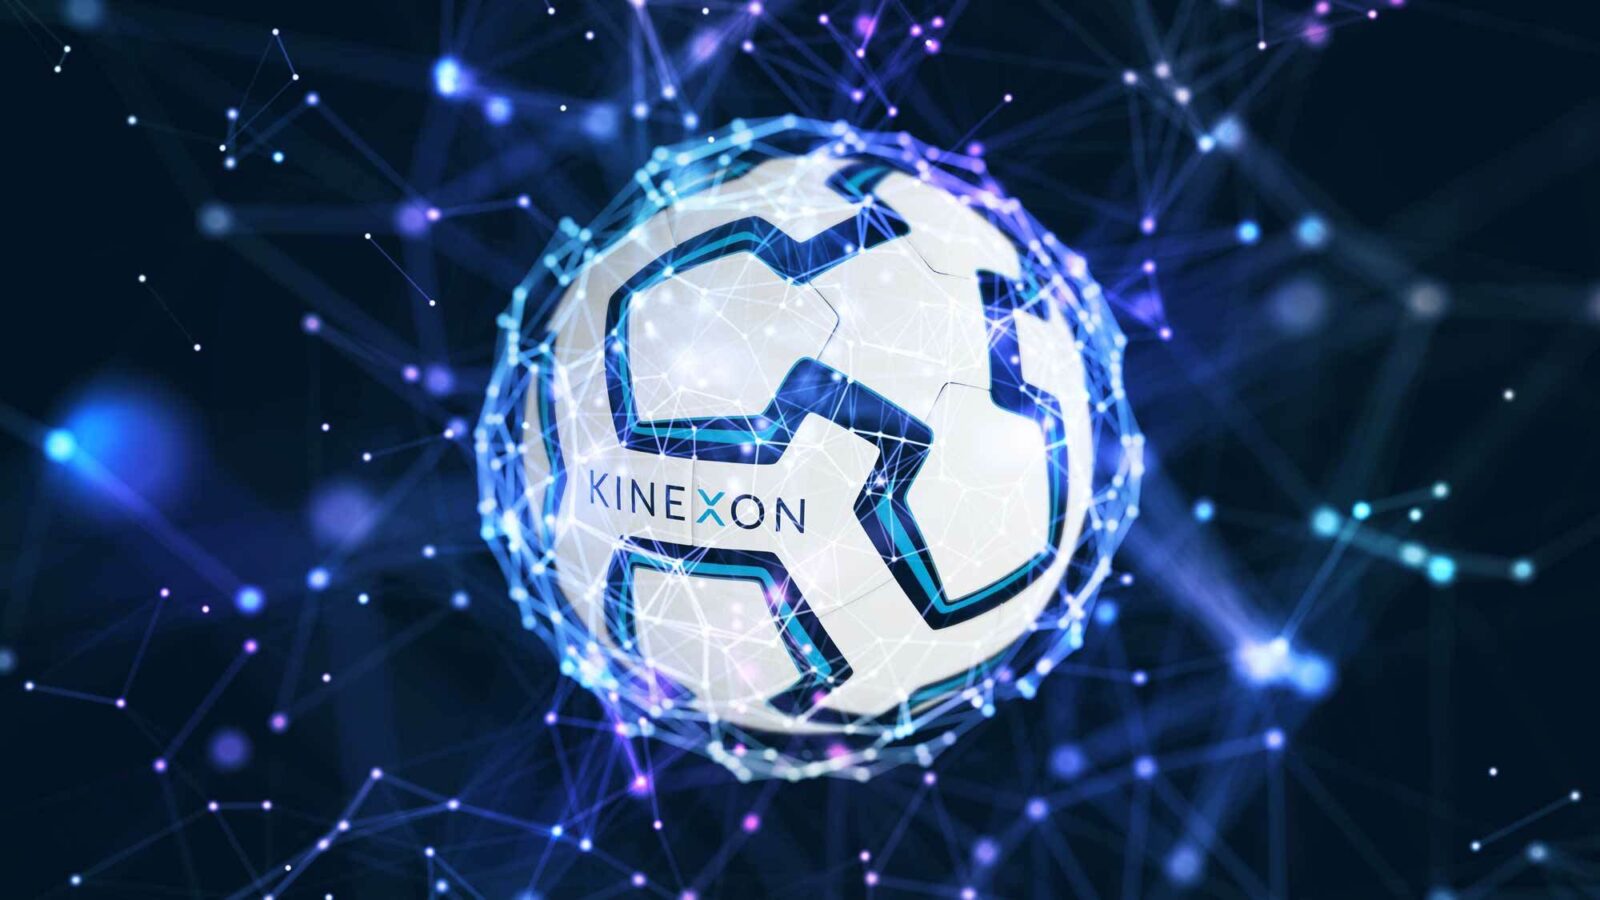 KINEXON xBall connected ball technology is used to track things like the speed of the ball or the amount of touches it gets during a game.